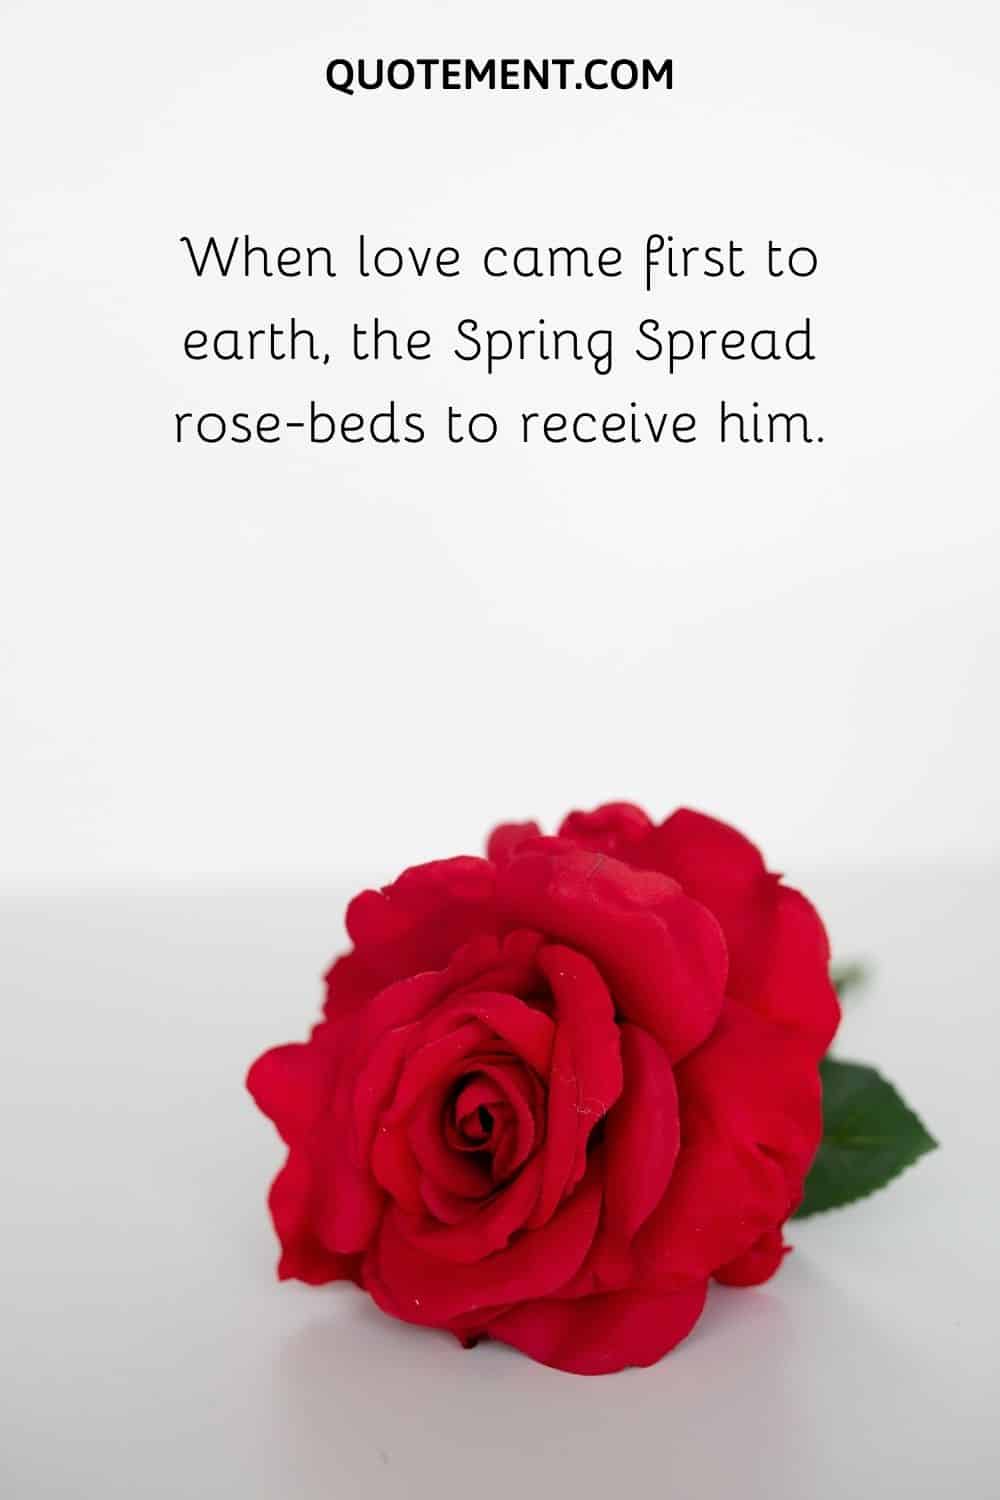 When love came first to earth, the Spring Spread rose-beds to receive him.